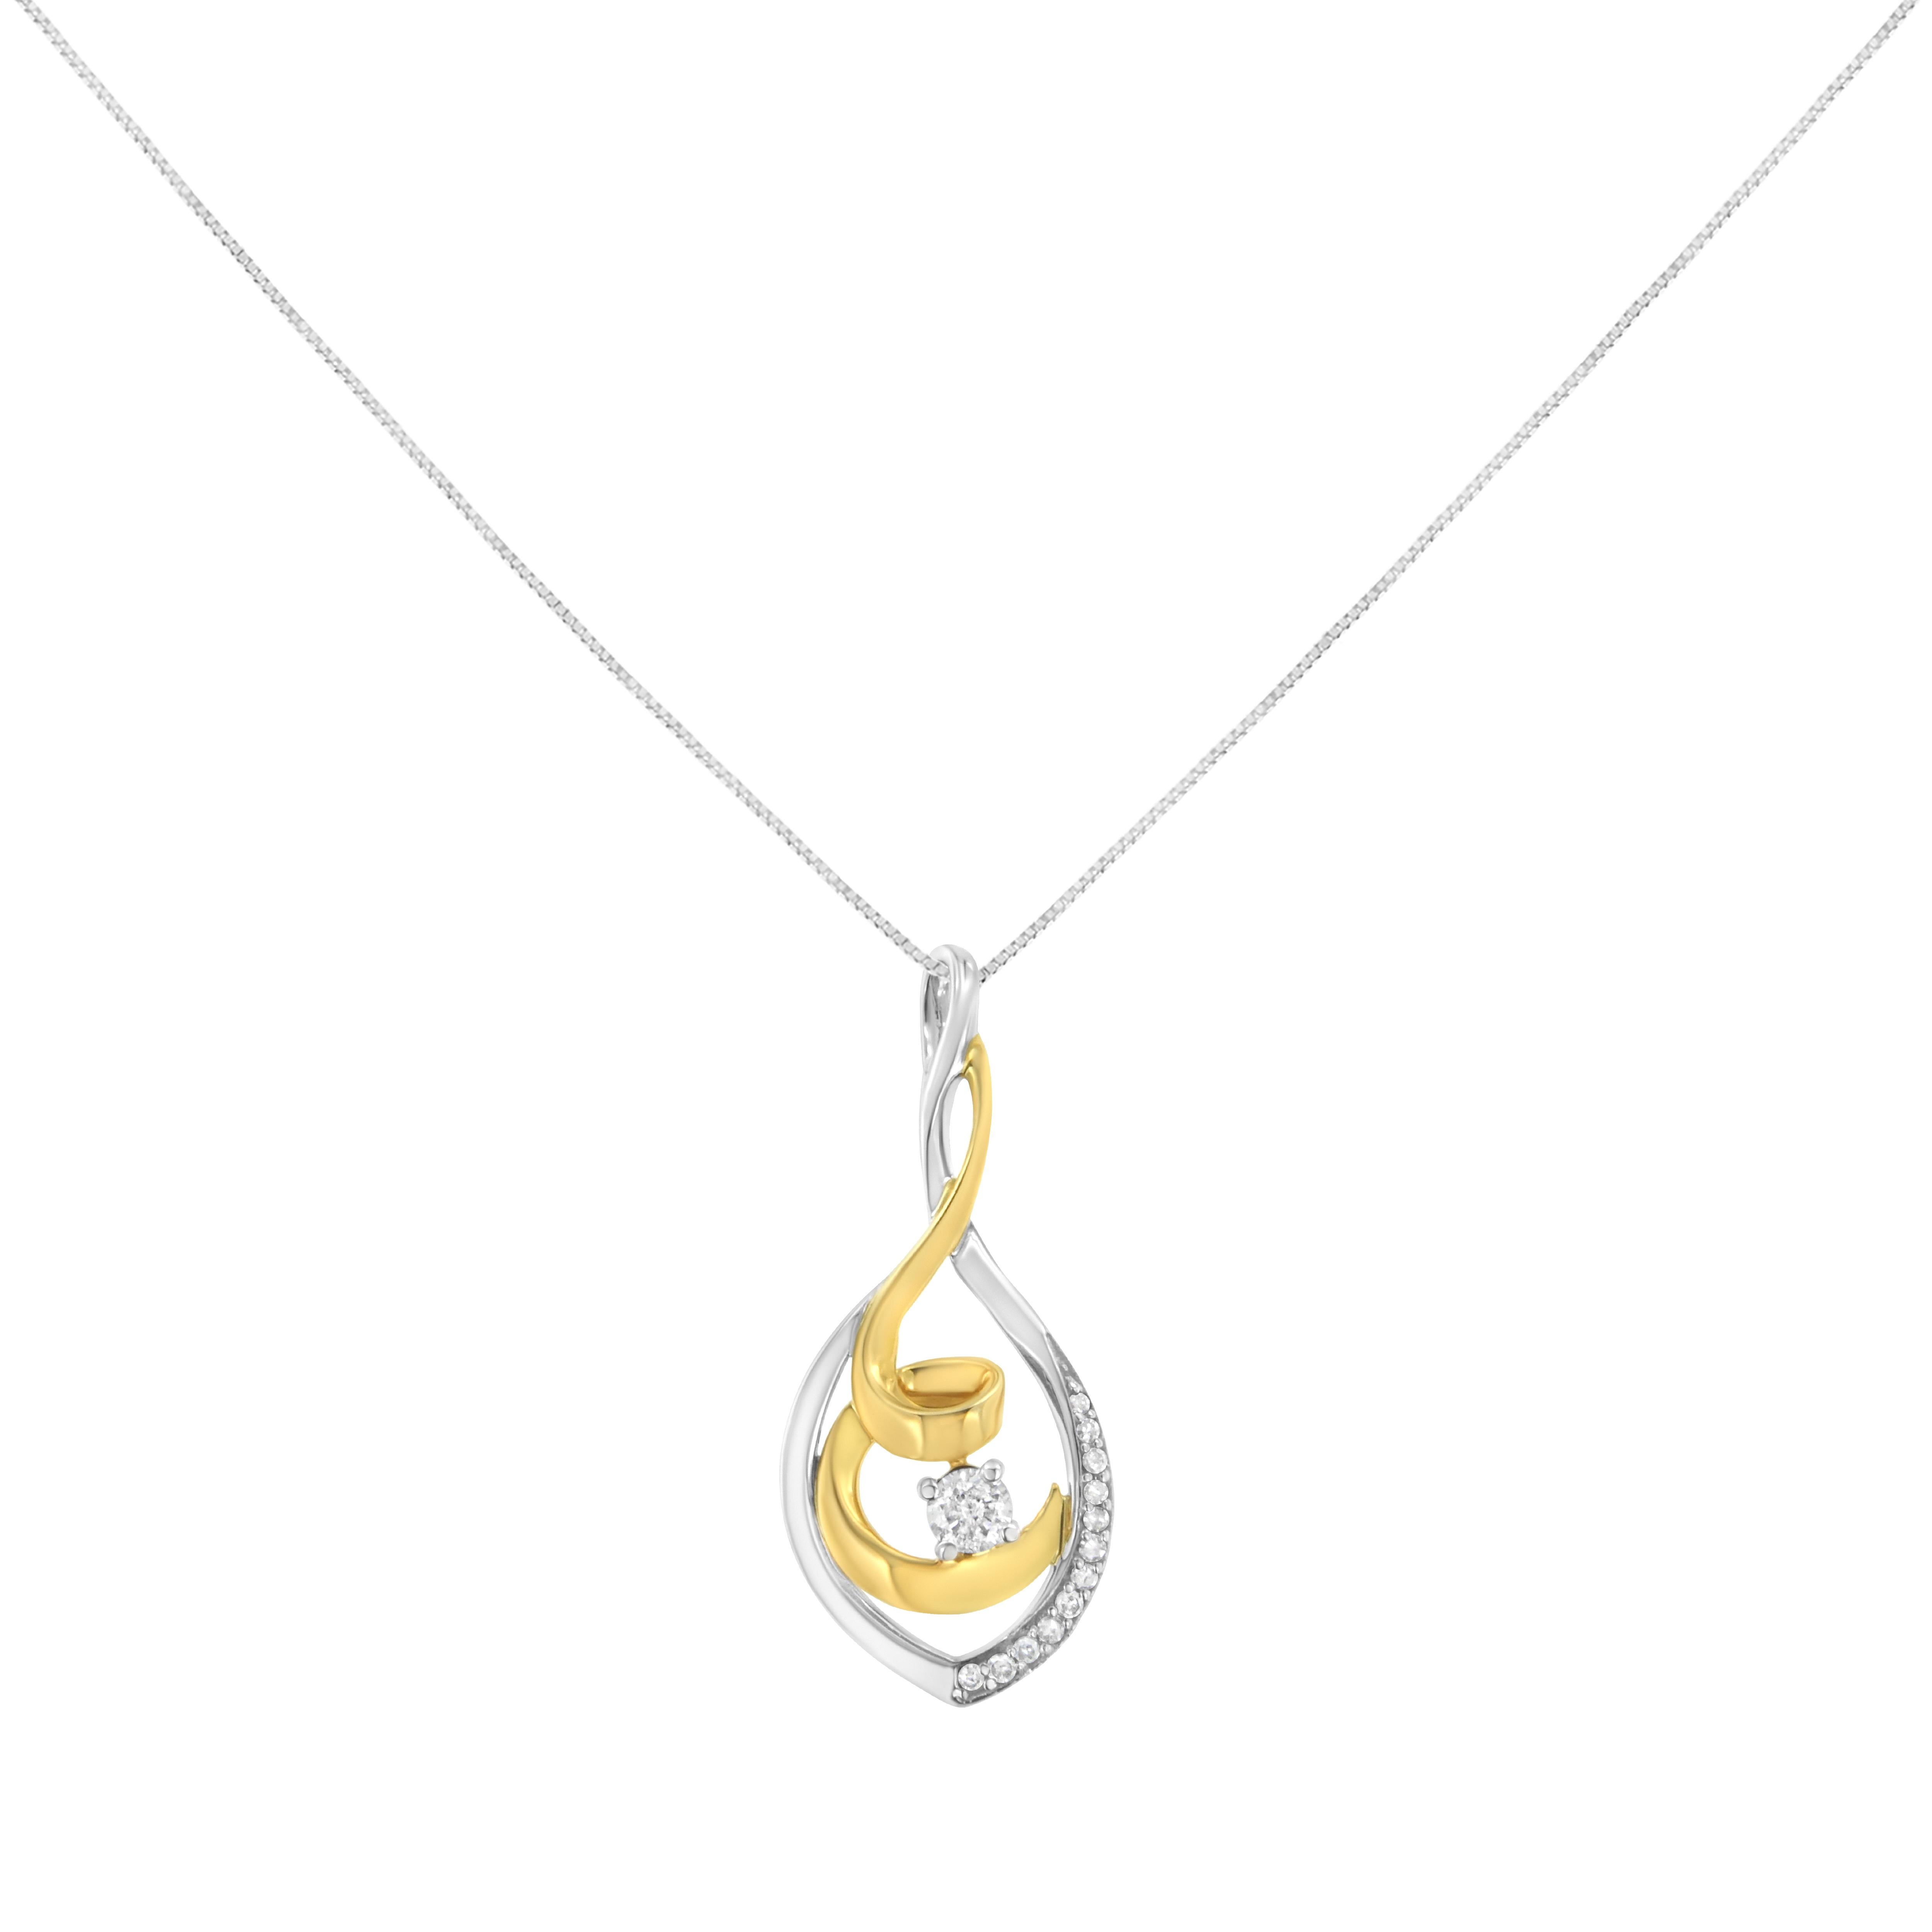 Swirls of white and yellow gold are linked together, creating an eye-catching contrast for this unique pendant necklace. A sprinkling of diamonds line the outer layer, while a single stone adorns the center, lending style and elegance. This